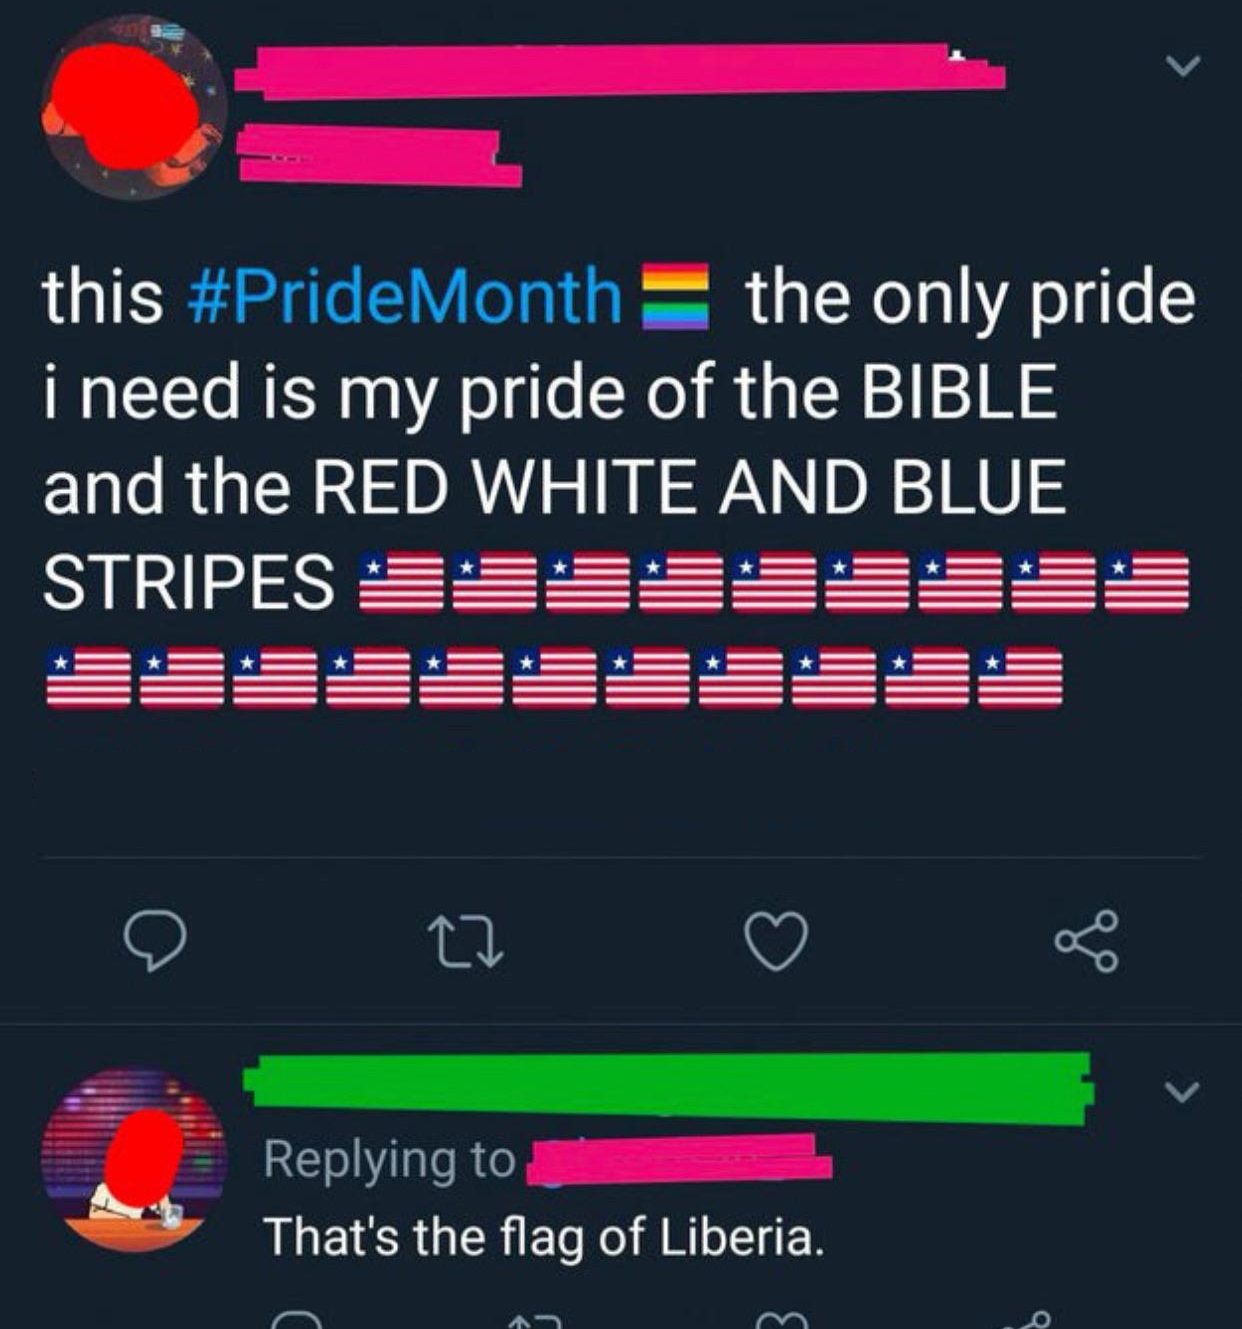 screenshot - this the only pride i need is my pride of the Bible and the Red White And Blue Stripes Ssssssss e 2 That's the flag of Liberia.